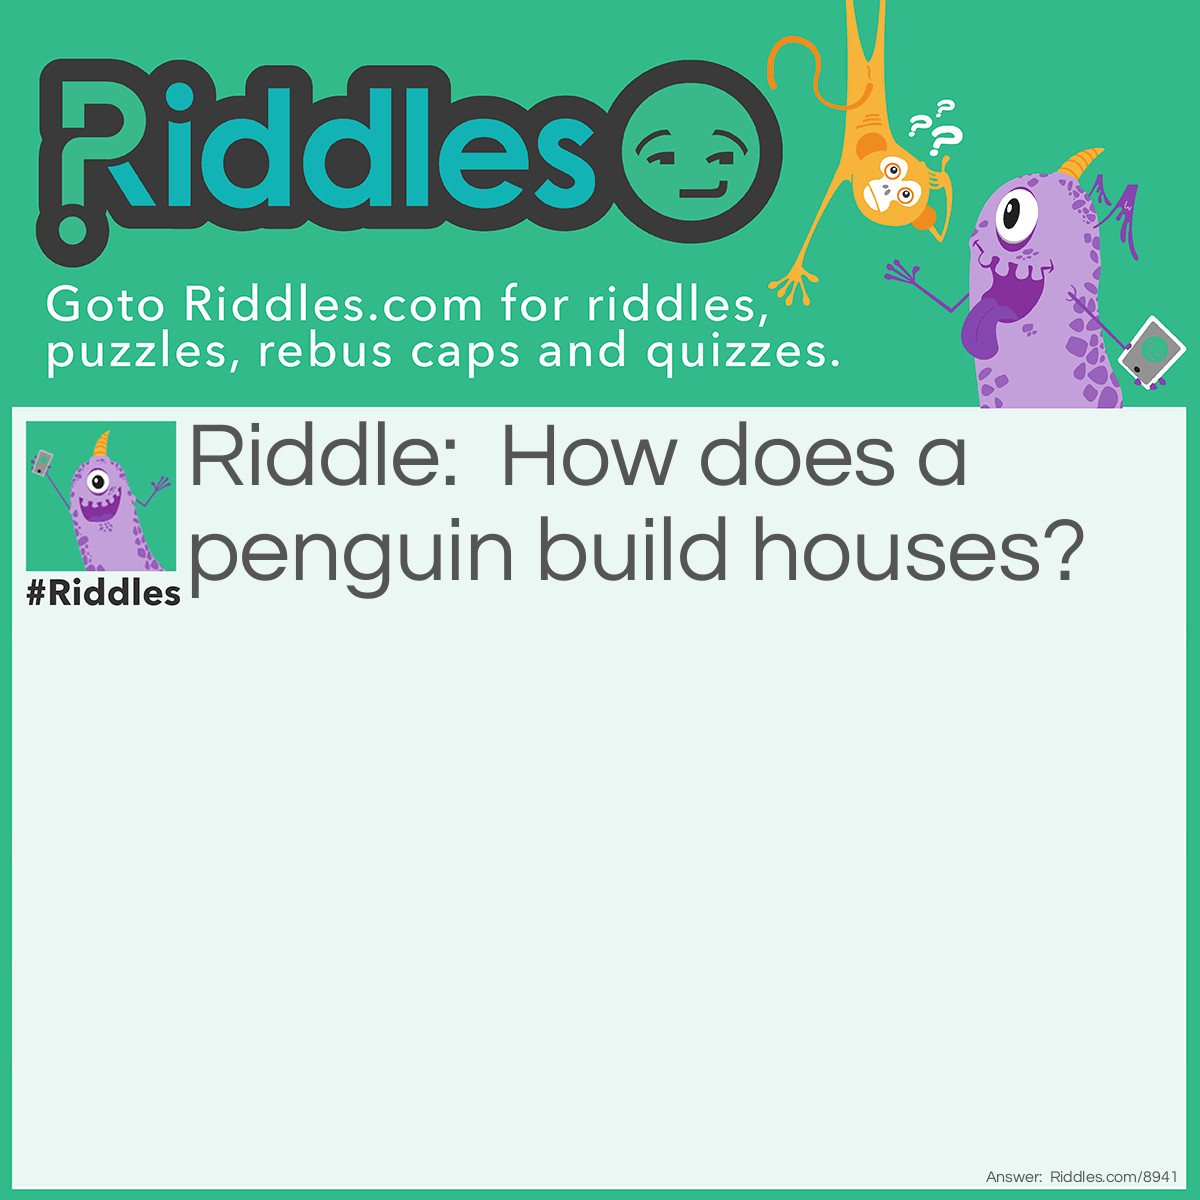 Riddle: How does a penguin build houses? Answer: Igloos it together.